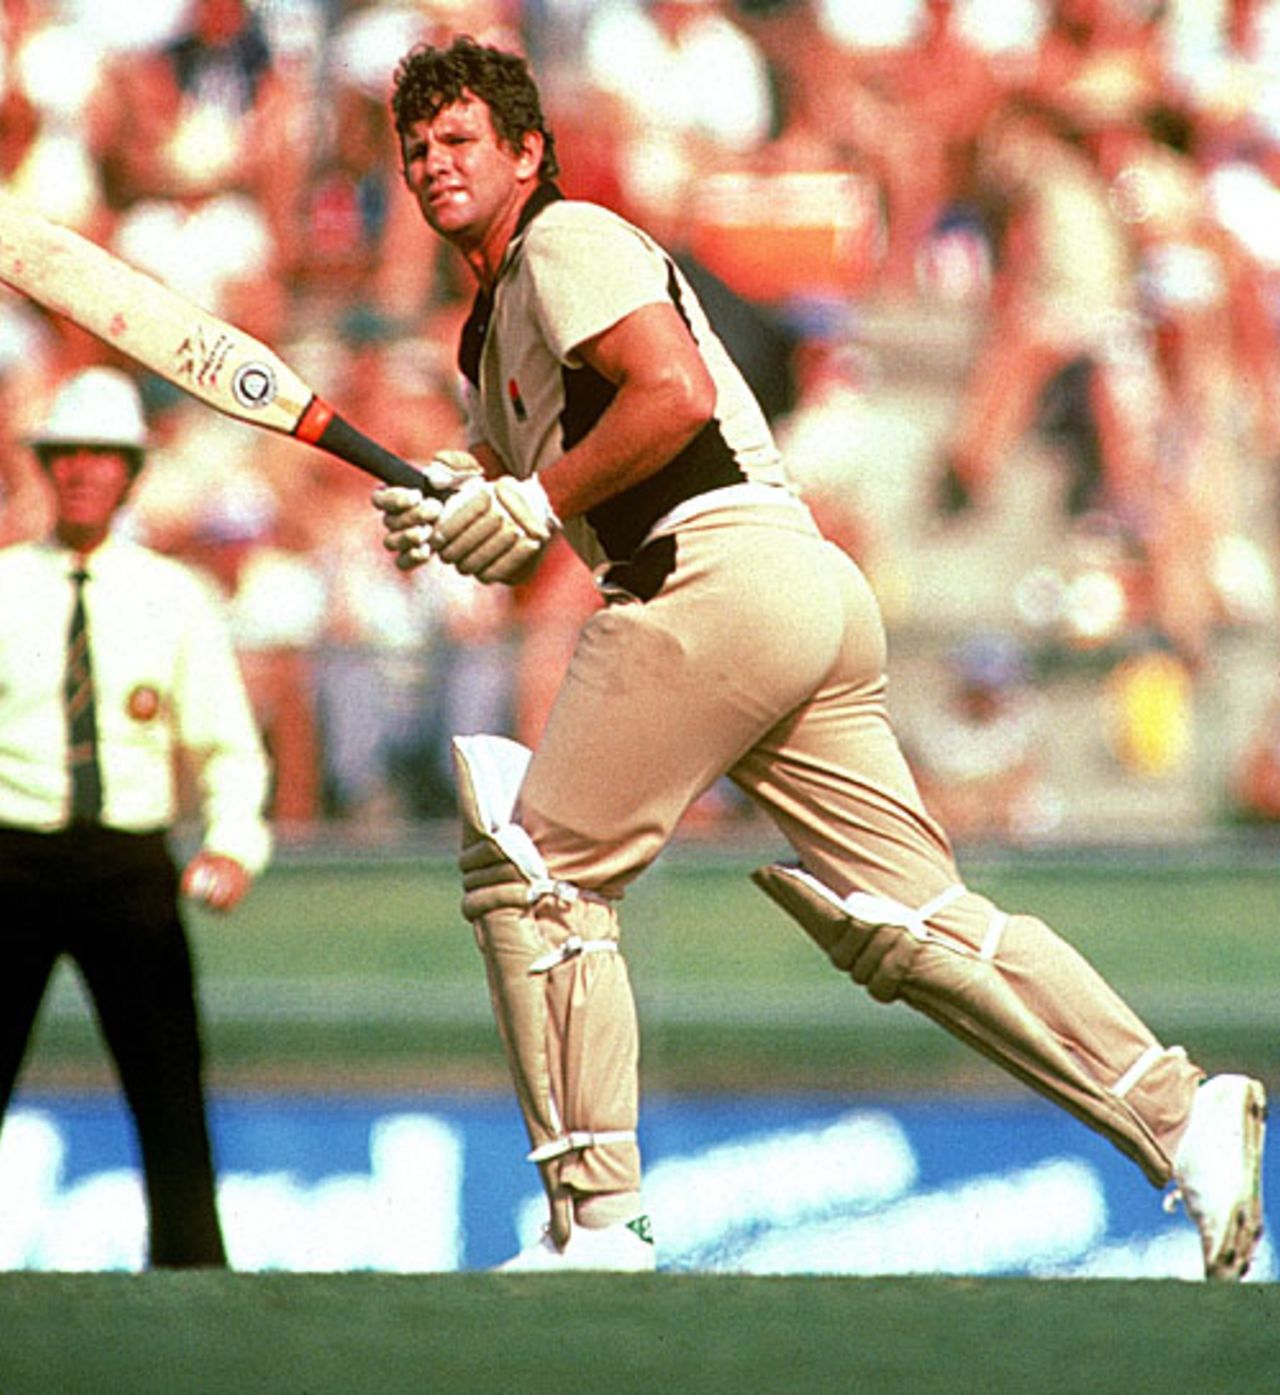 Lance Cairns bats with a unique bat during a one-day international, July, 1978